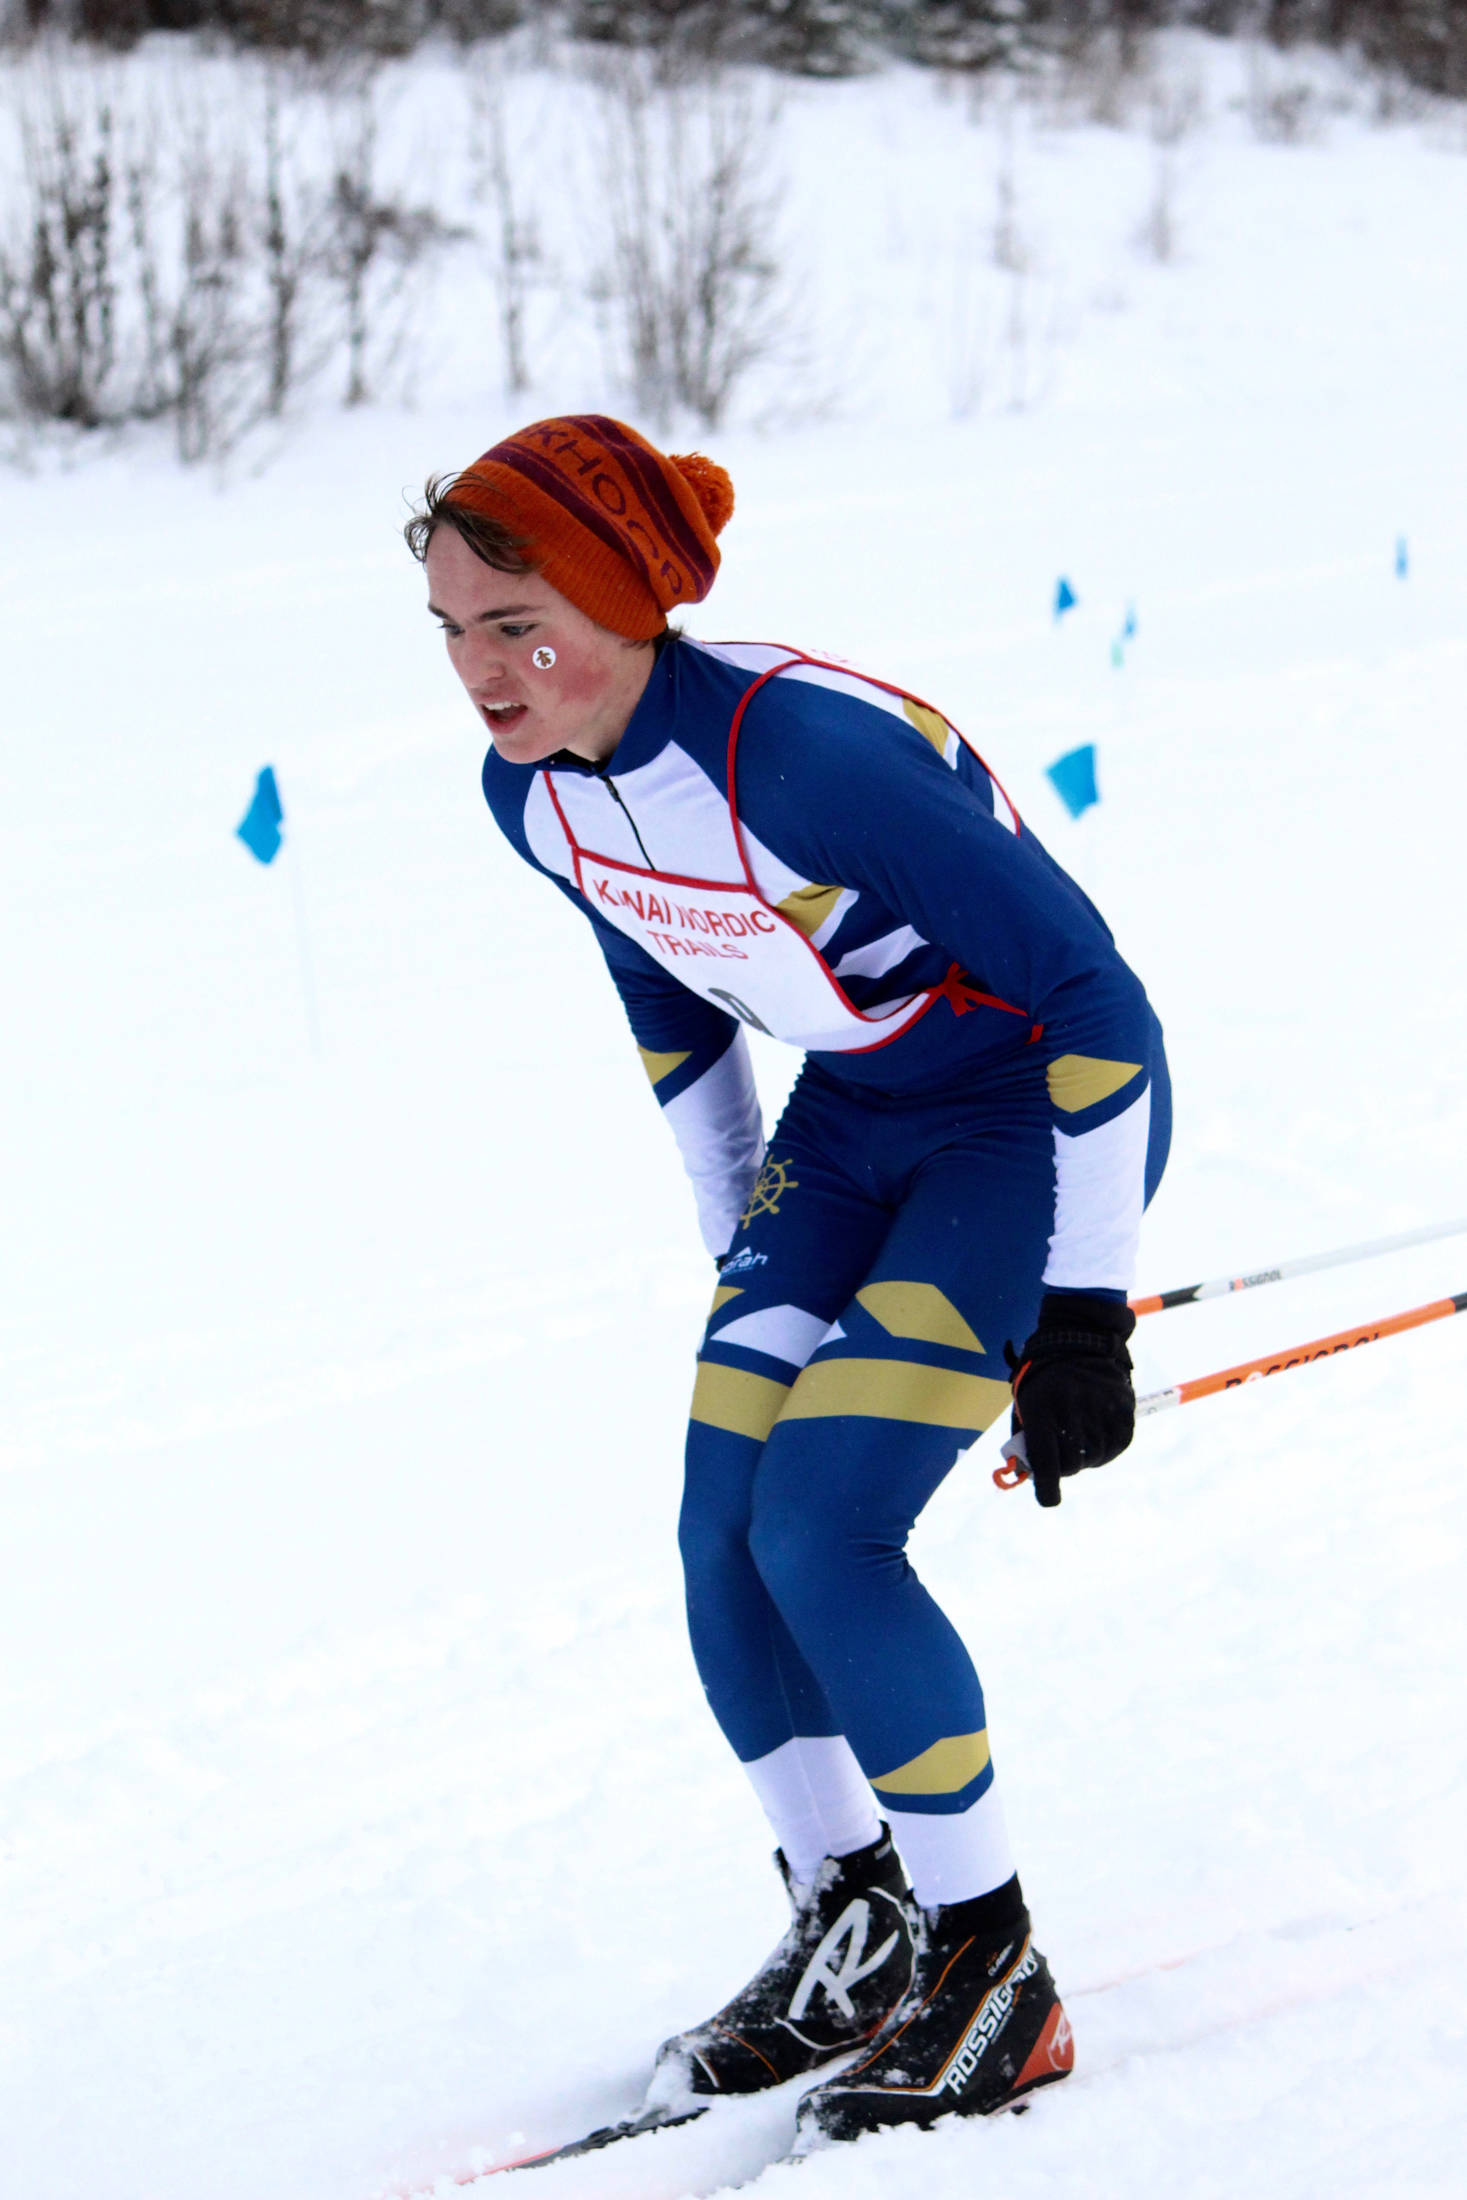 Homer’s Denver Waclawski traverses a course at Tsalteshi Trails during the Tsalteshi Classic Invitational on Tuesday, Dec. 5, 2017 in Soldotna, Alaska. Five of Homer’s 10 skiers were awarded ribbons during the impromptu meet. (Photo by Jessie Fabich)